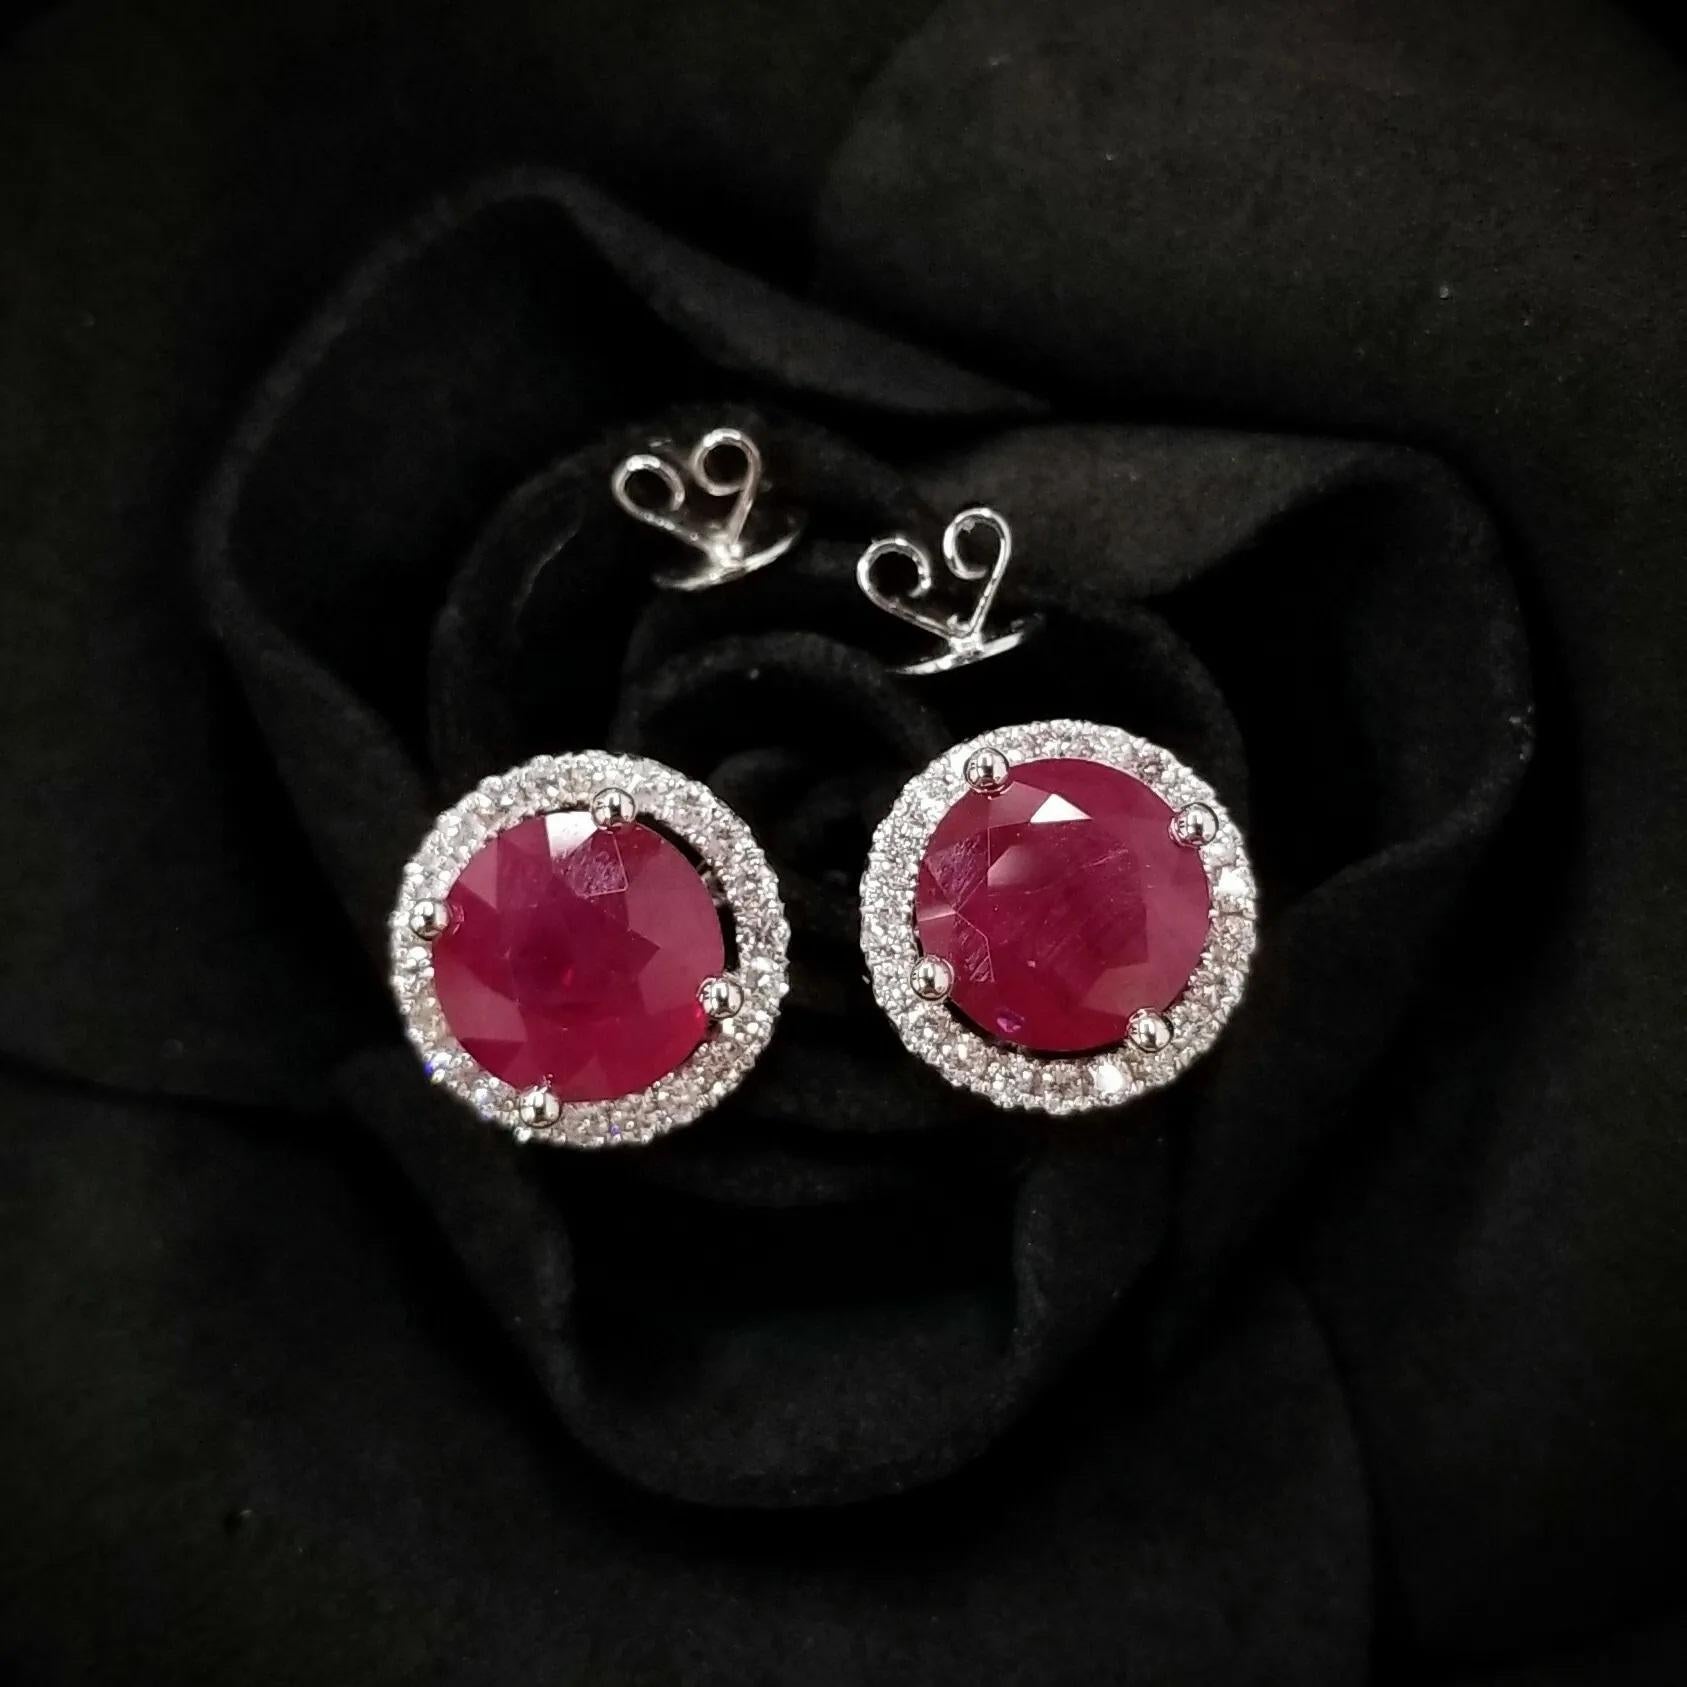 Burmese rubies are sought after for their beautiful red tones. Halo set with round brilliant-cut diamonds, the total diamond weight for the piece is 0.37 carats. 
The ruby studs can be detached from the white diamond jackets. You could either wear